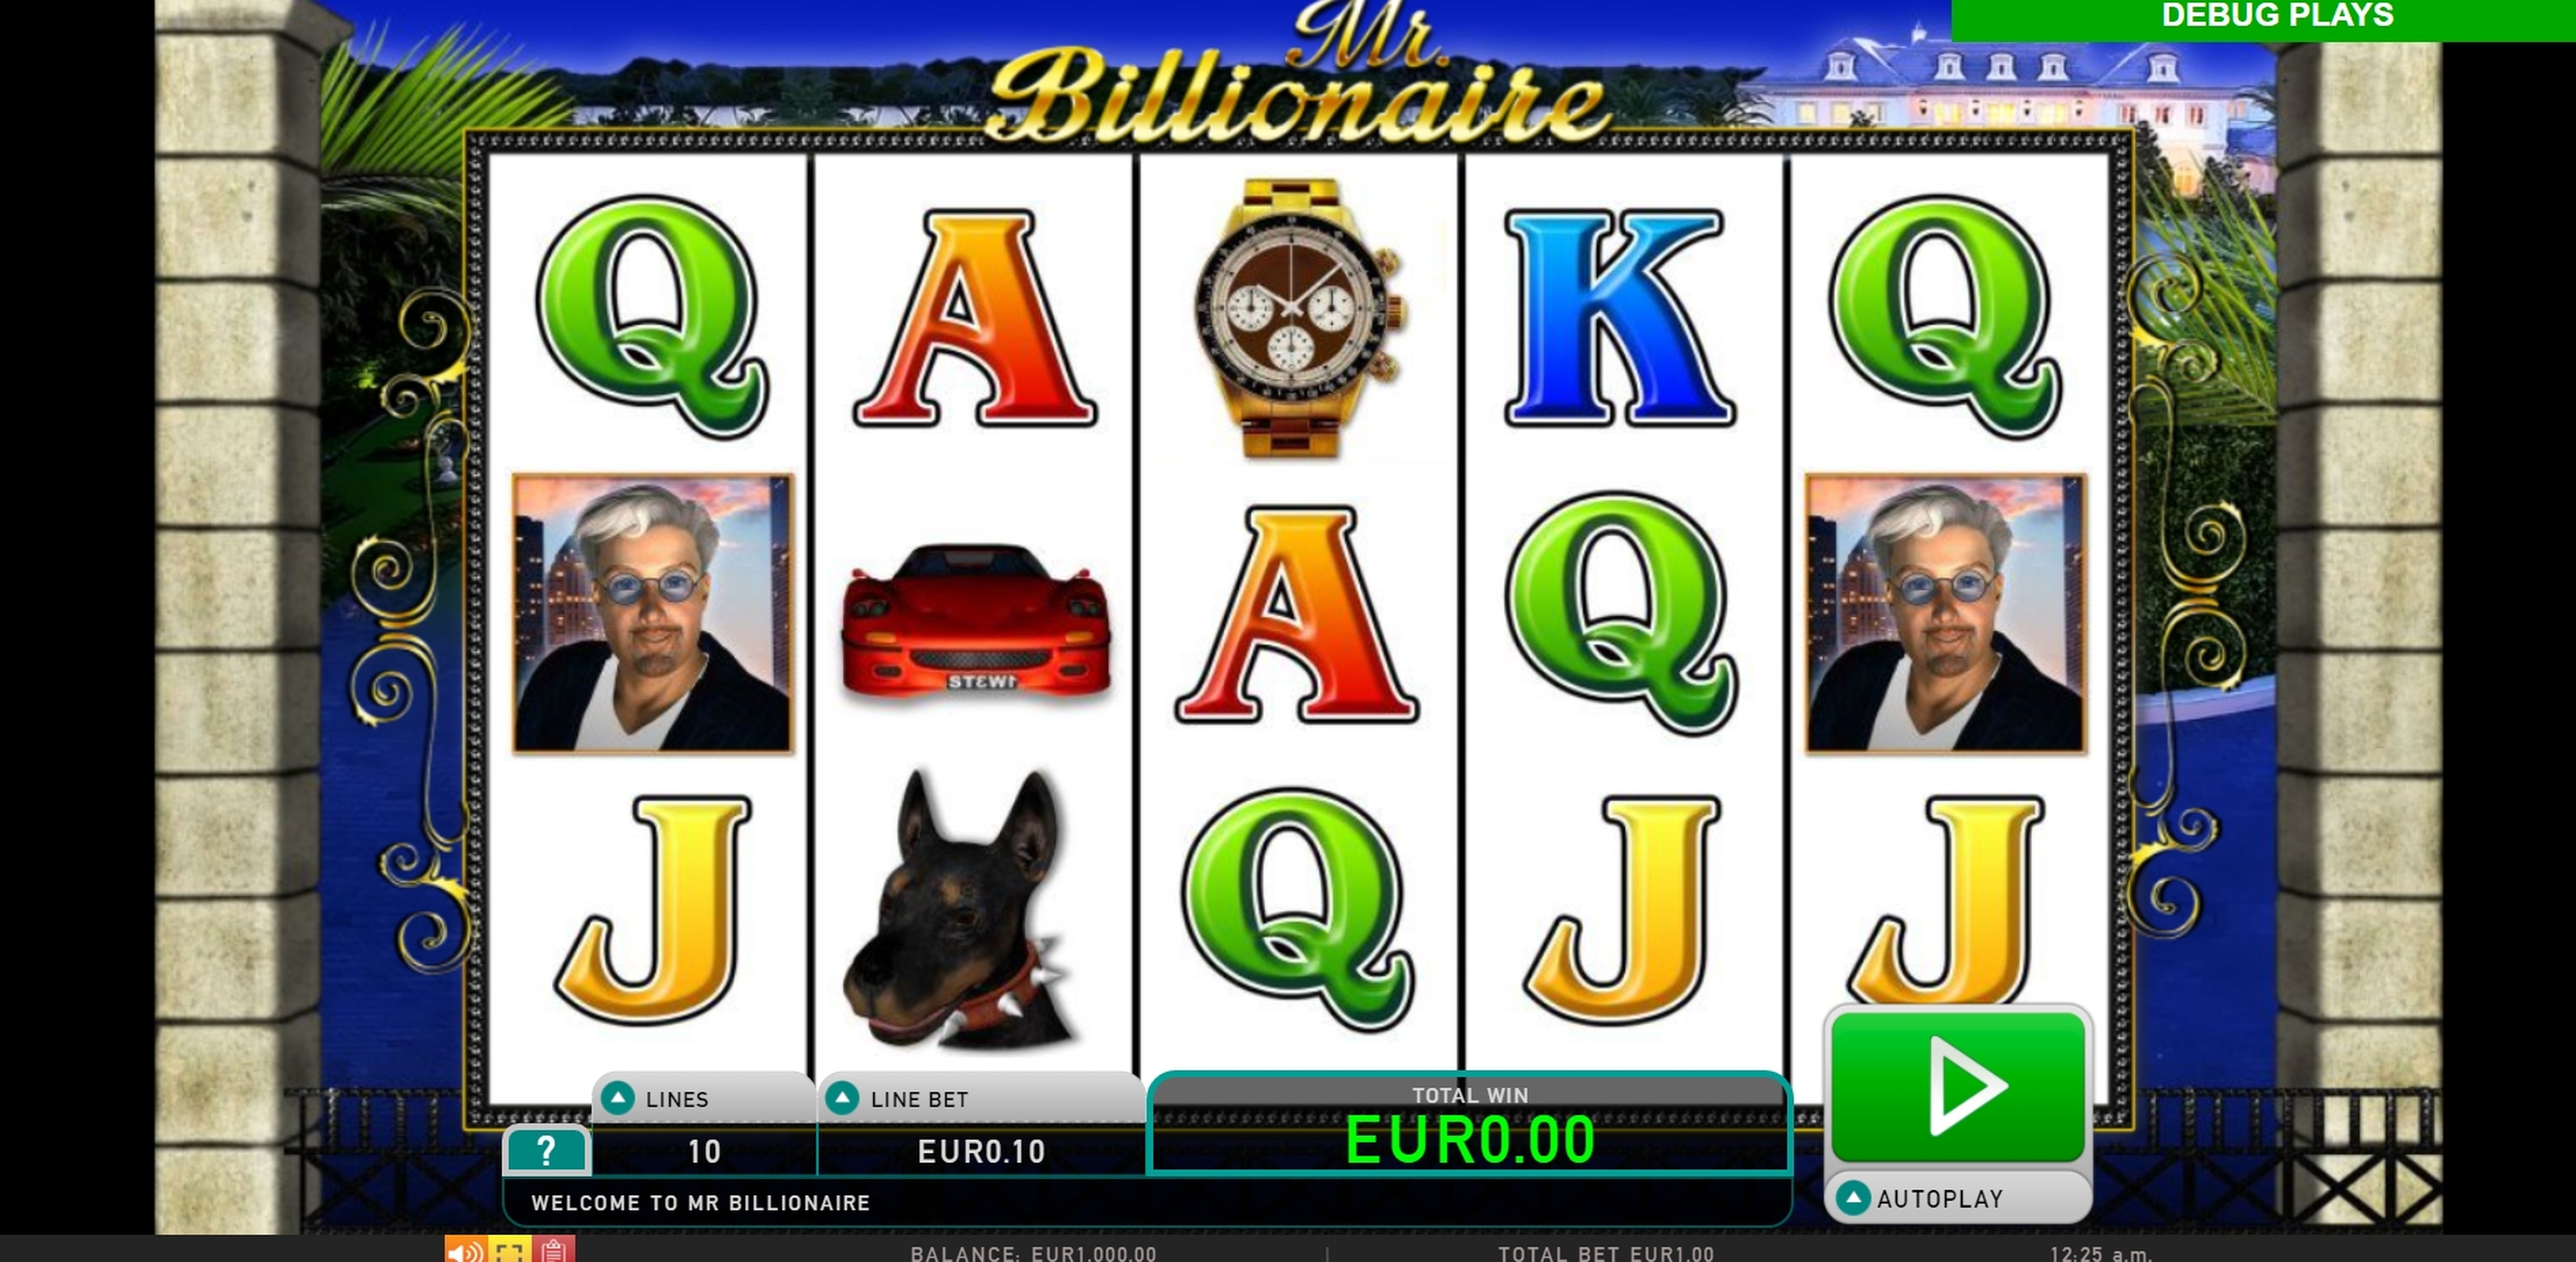 Mr. Multiplier Free Play Slot Machine Review